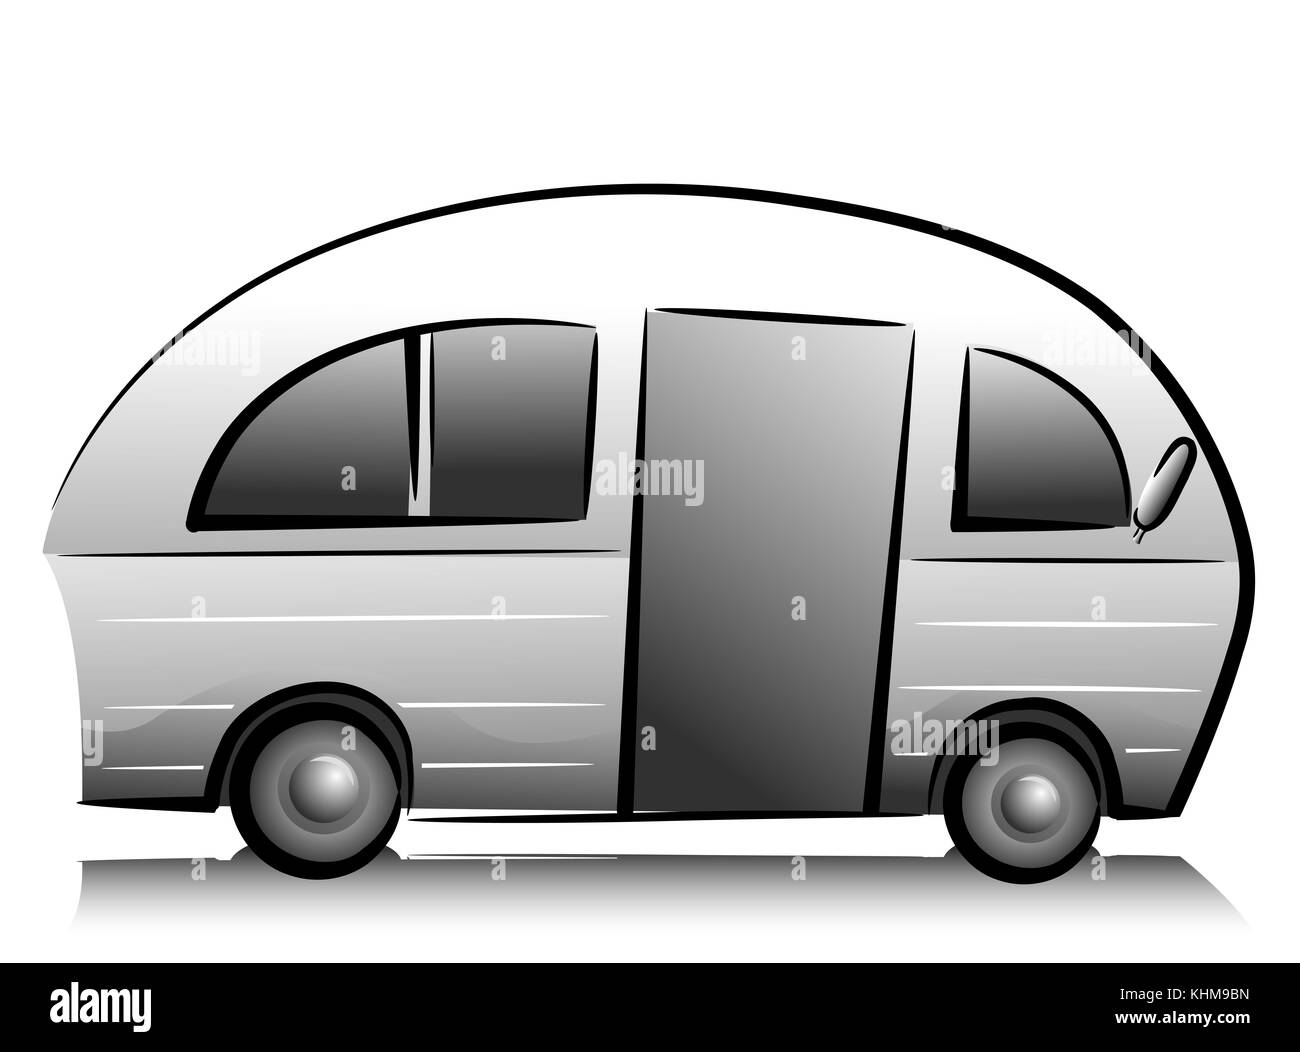 Black and White Illustration Featuring a Recreational Vehicle Ready for Travel Stock Photo